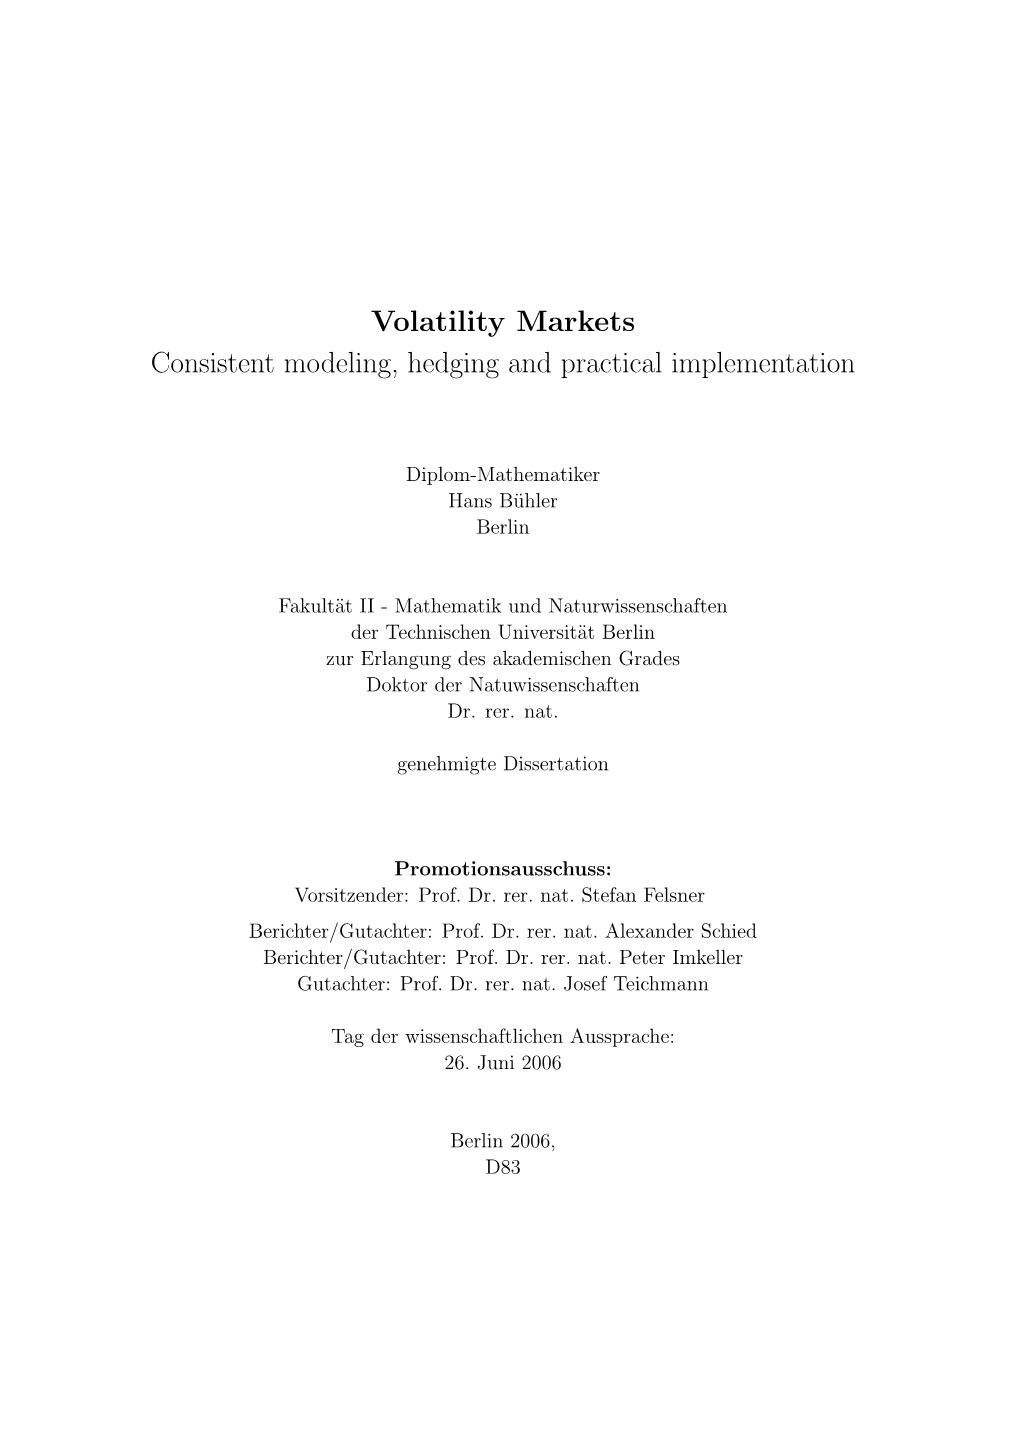 Volatility Markets Consistent Modeling, Hedging and Practical Implementation